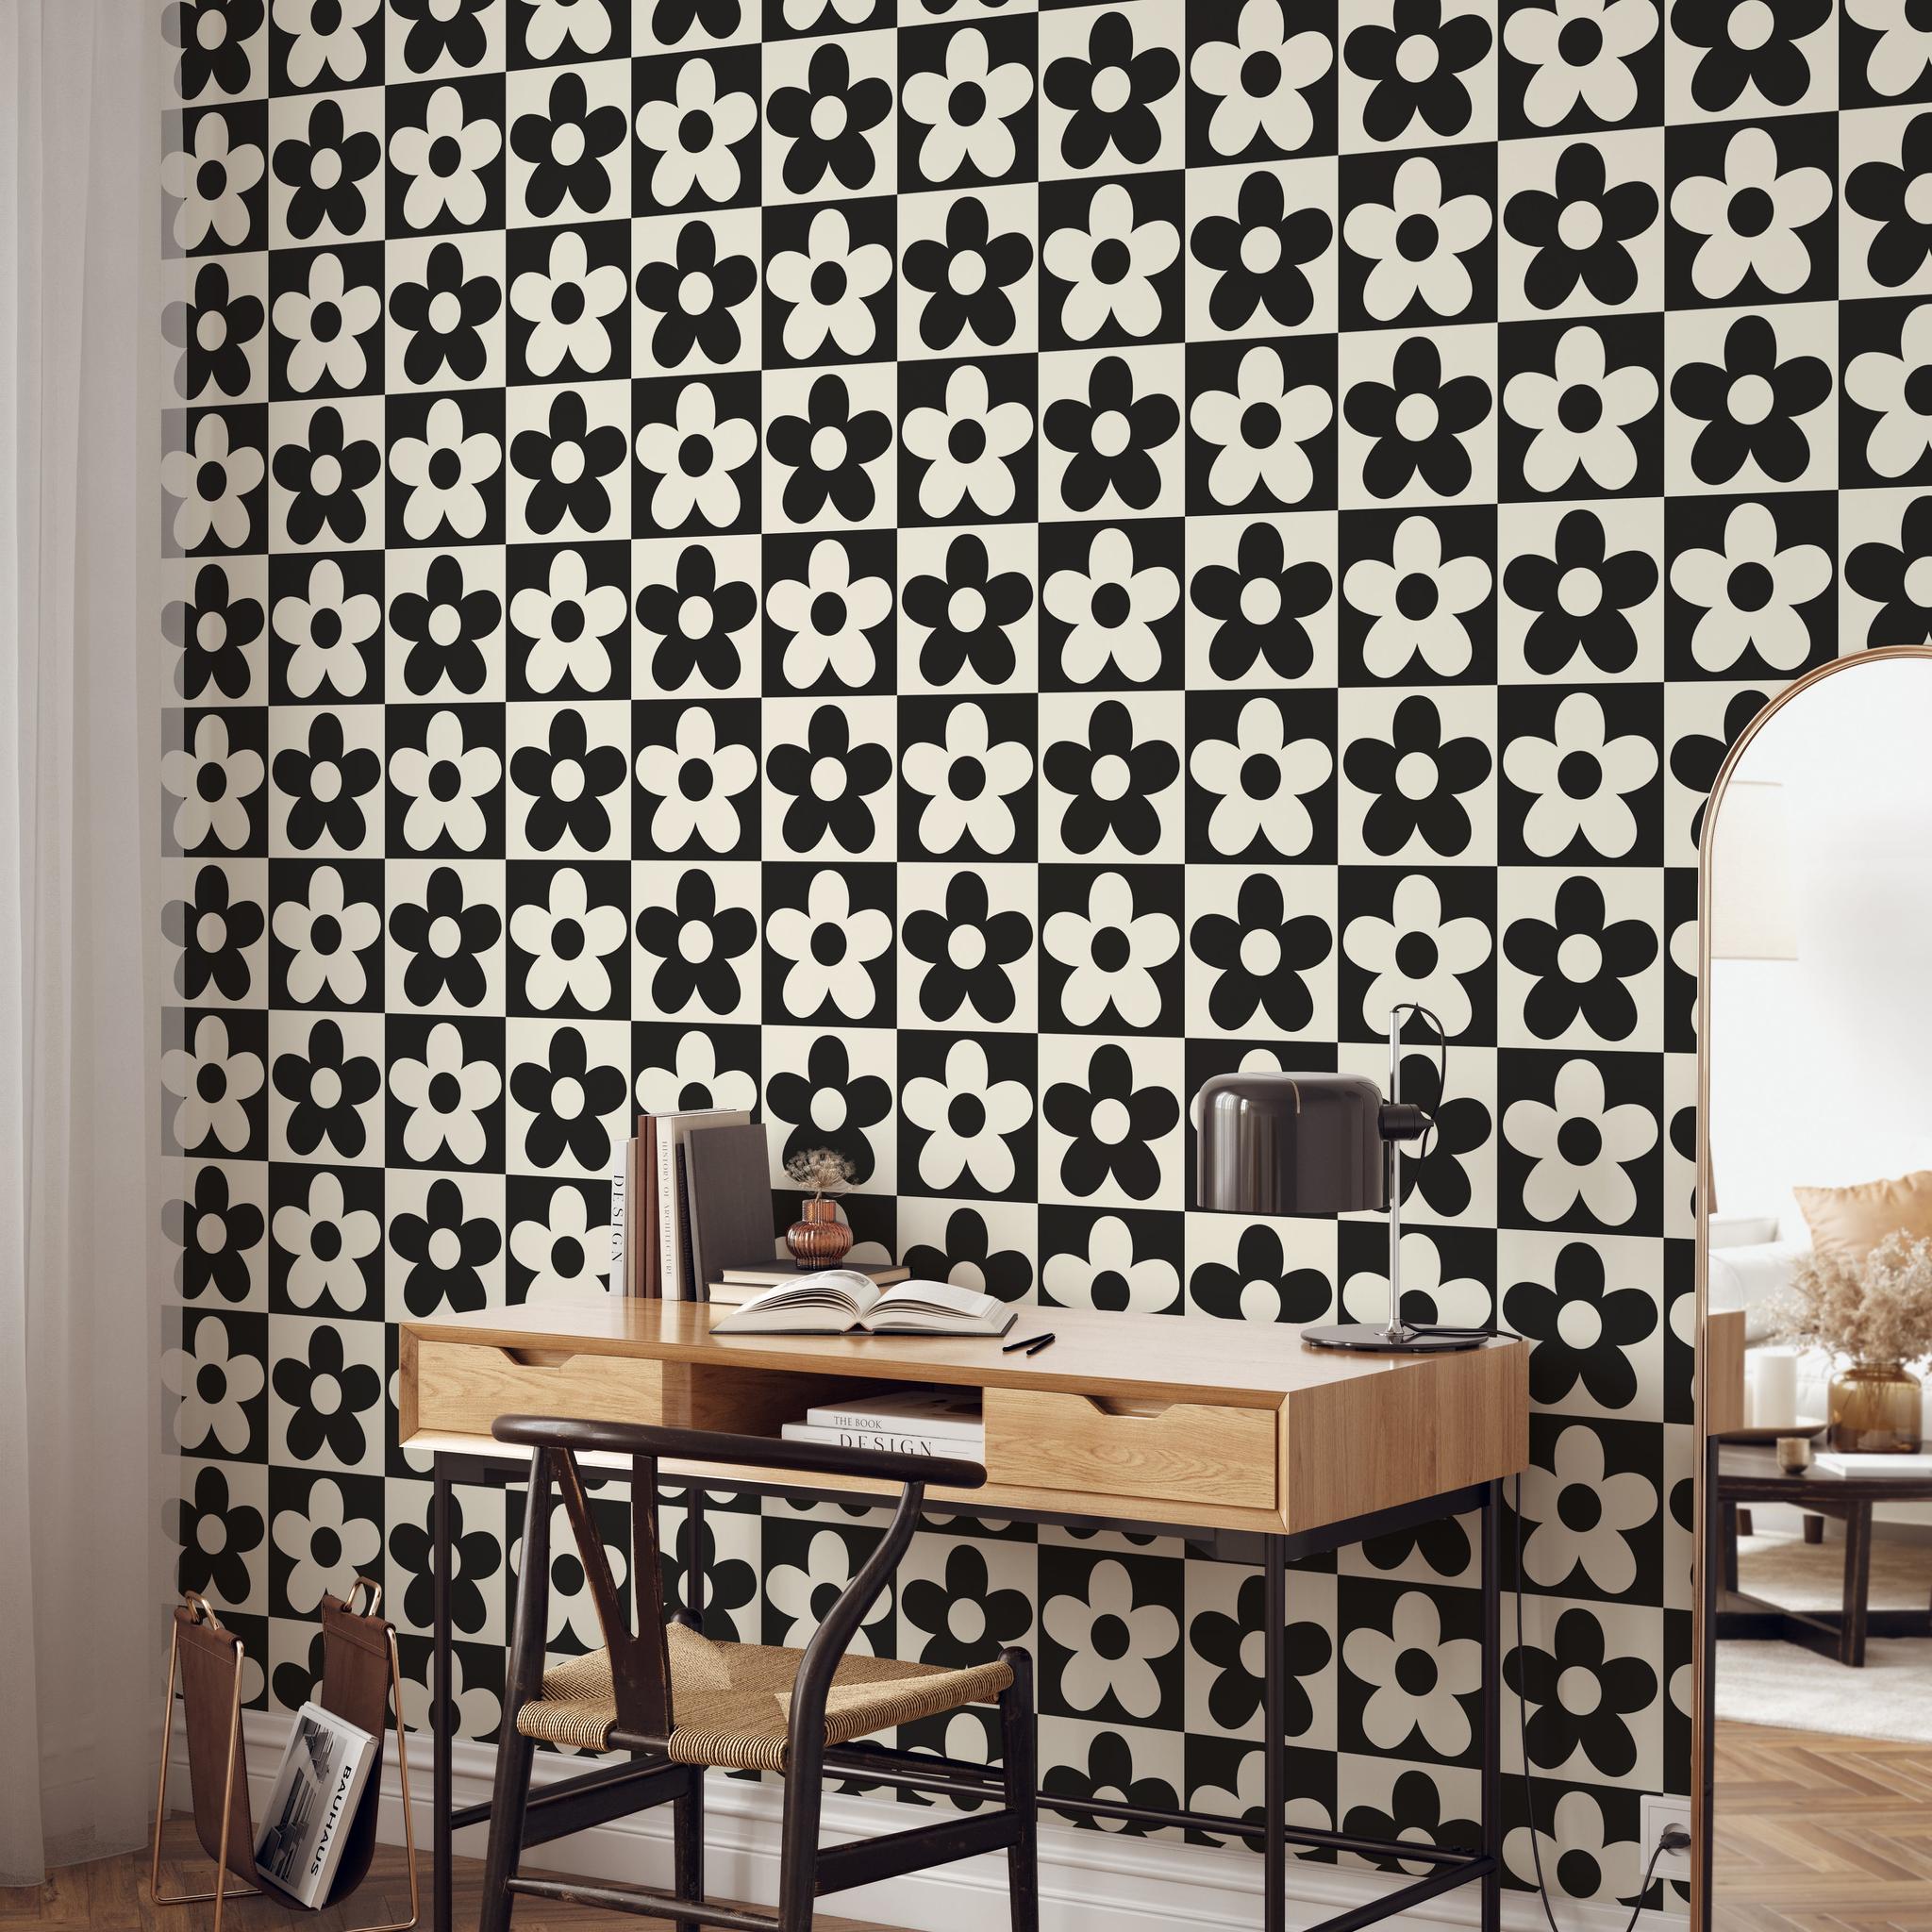 "Wall Blush Lizzie Wallpaper design in home office with modern desk and decor accents, showcasing bold patterns."